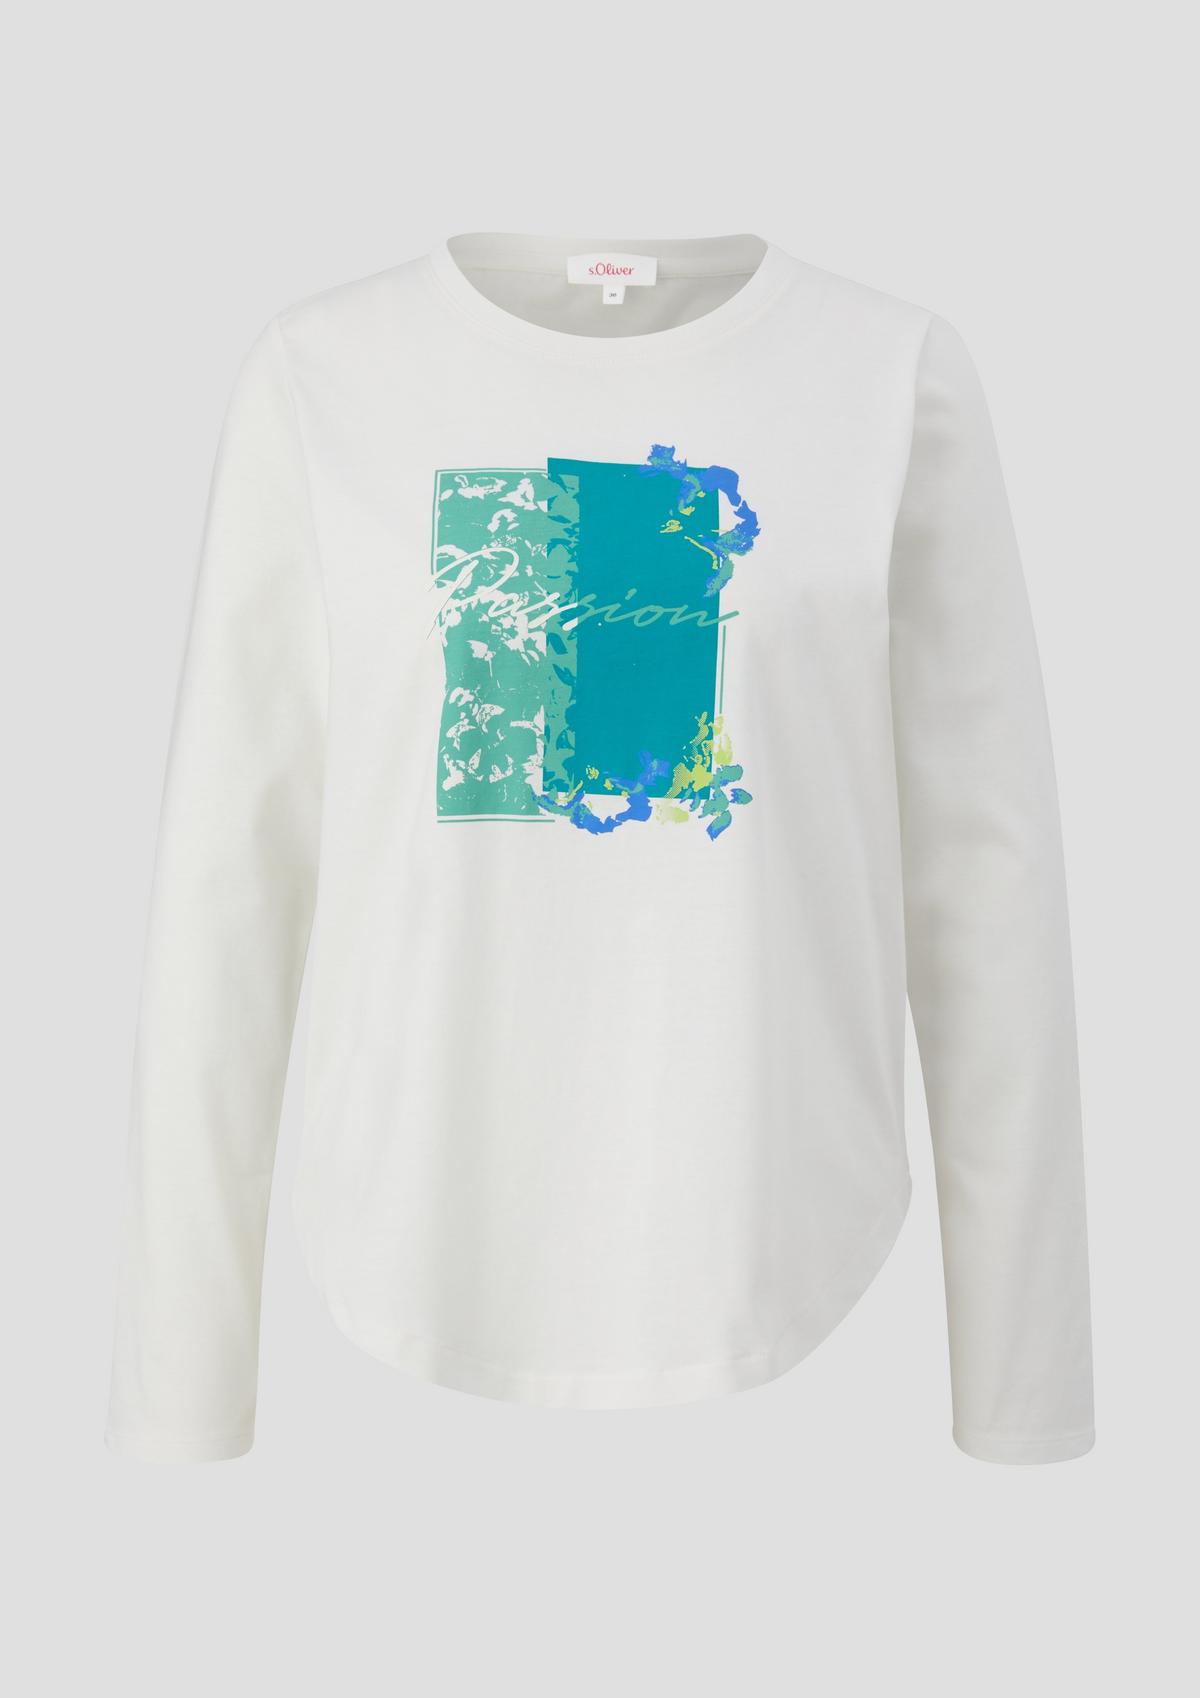 s.Oliver Long sleeve top with a front print